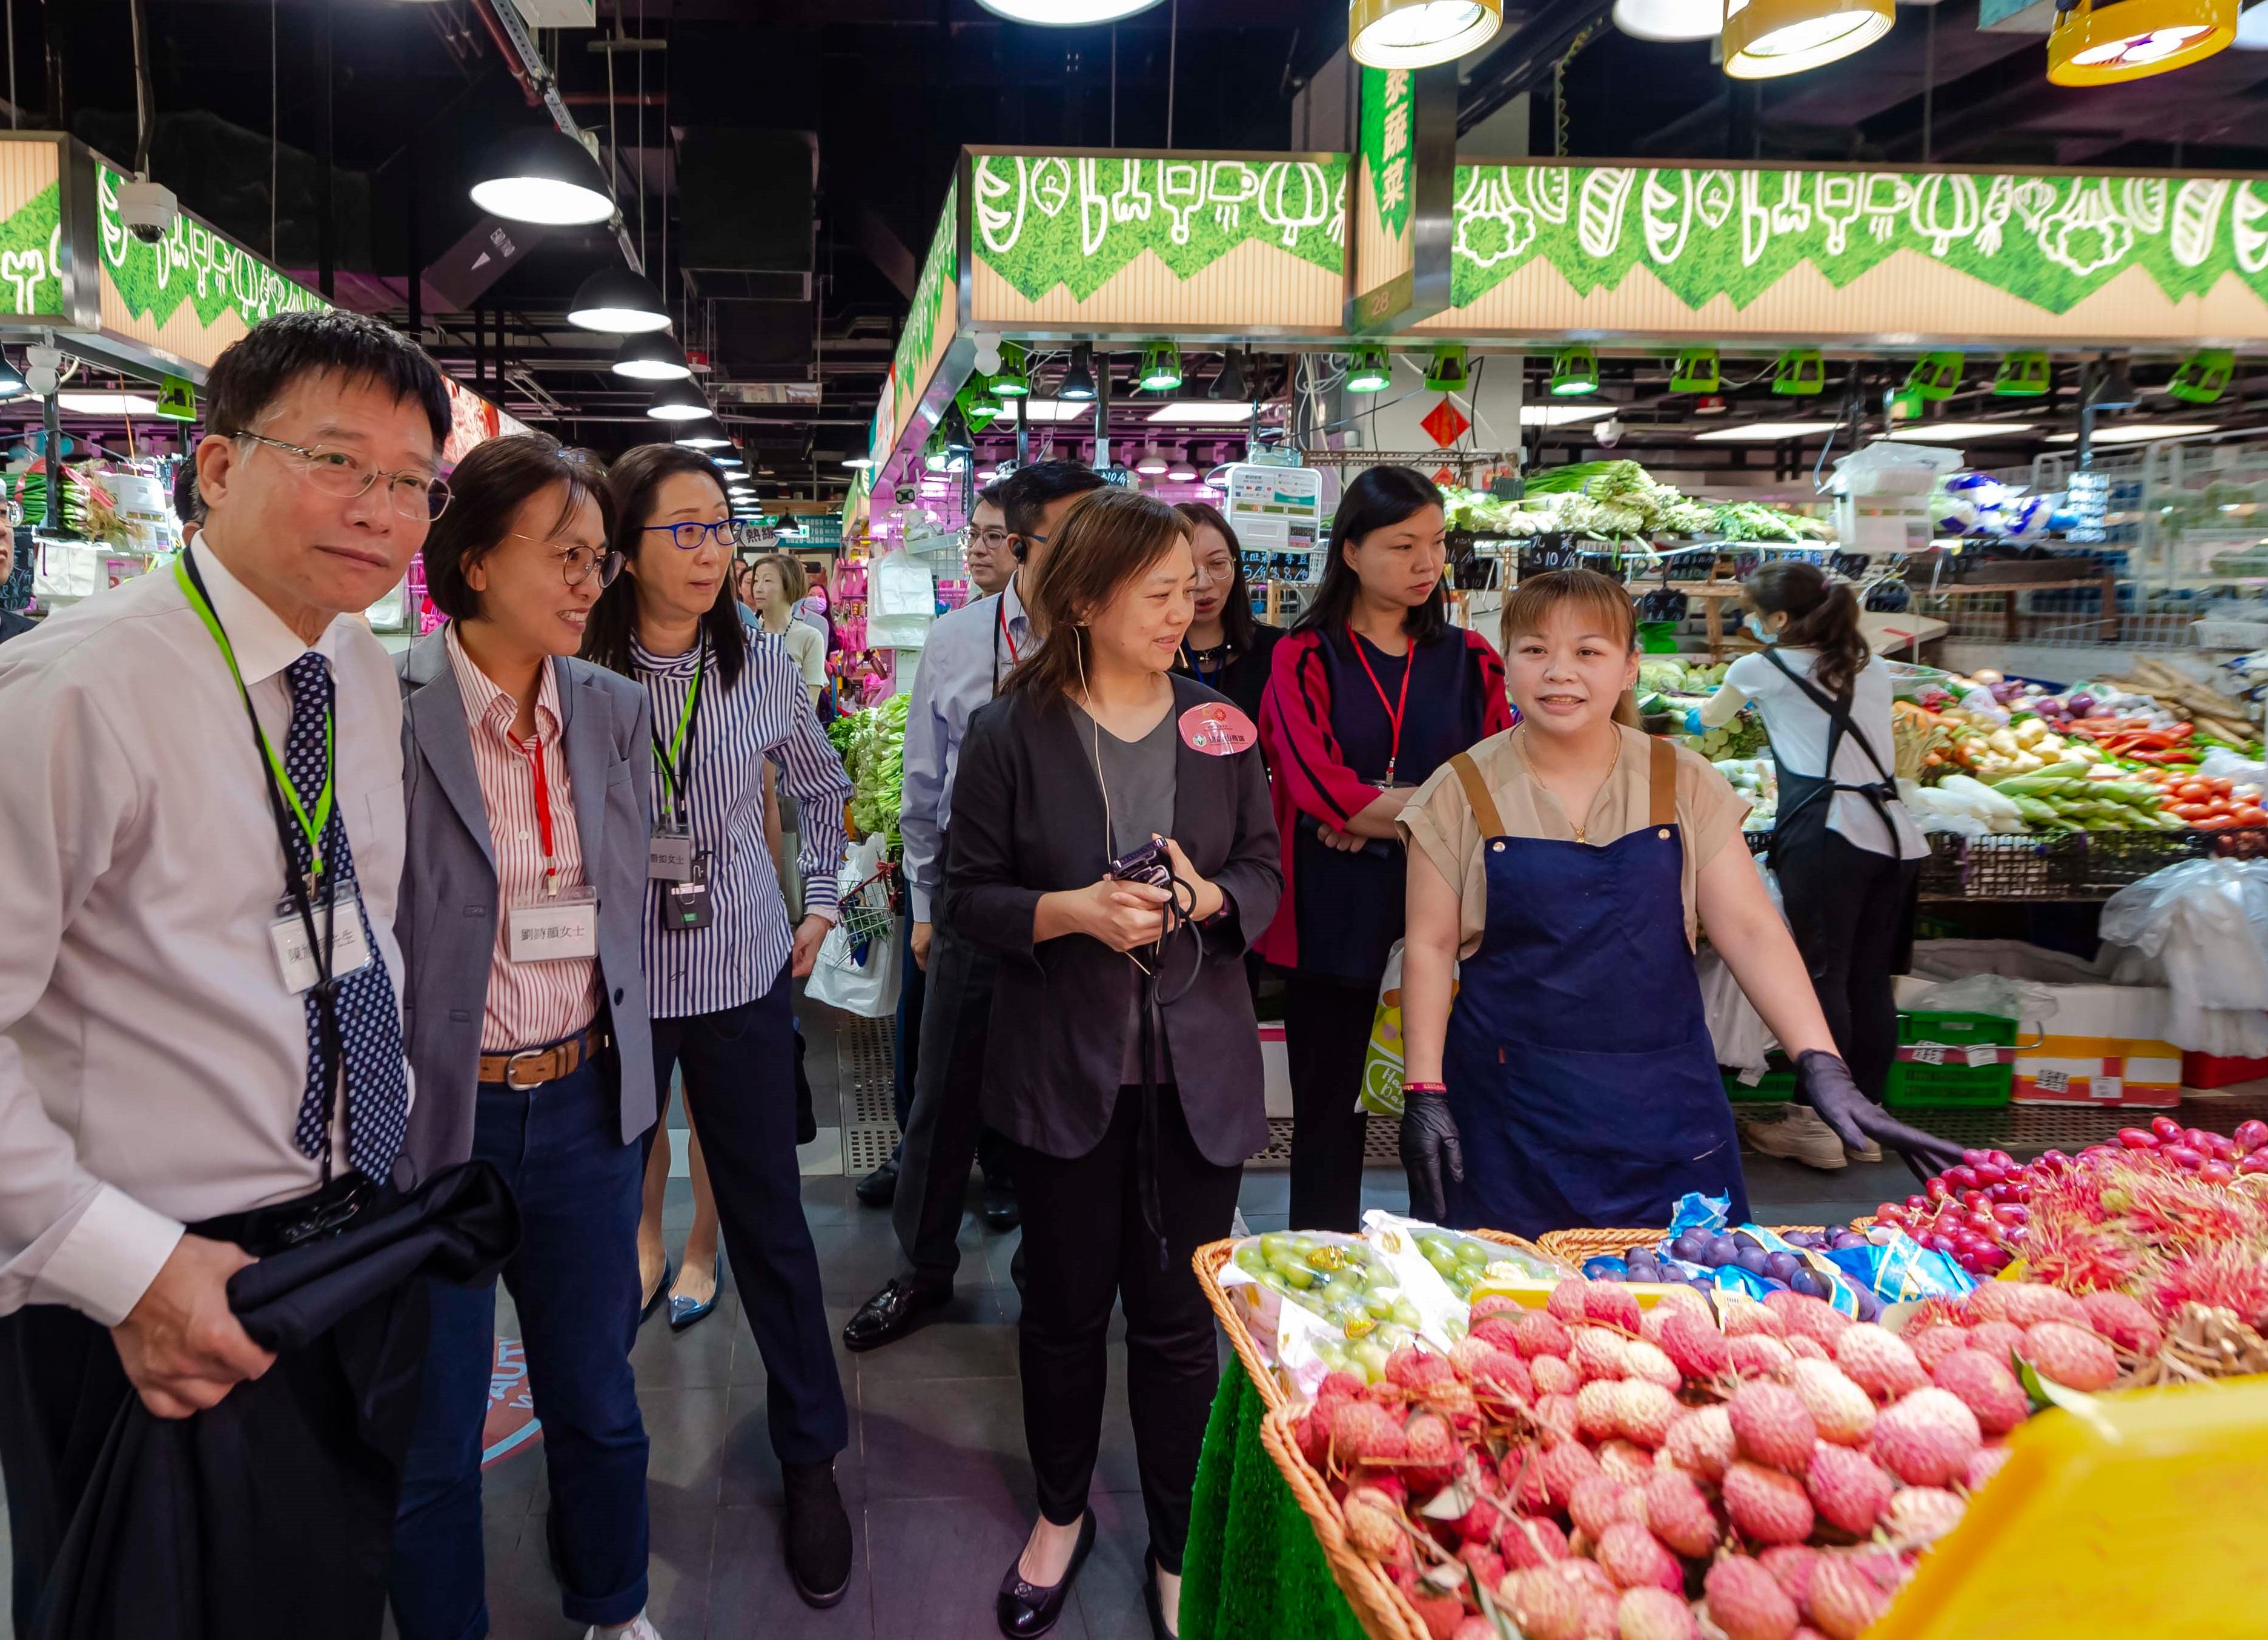 Members of the Hong Kong Housing Authority (HA) and its Commercial Properties Committee (CPC) today (June 20) visited the commercial facilities at the HA's Queens Hill Estate in Fanling. Photo shows the Chairman of the HA's CPC, Ms Serena Lau (second left), and members of the HA/CPC visiting a single-operator market to learn about its design, layout and trade mix.